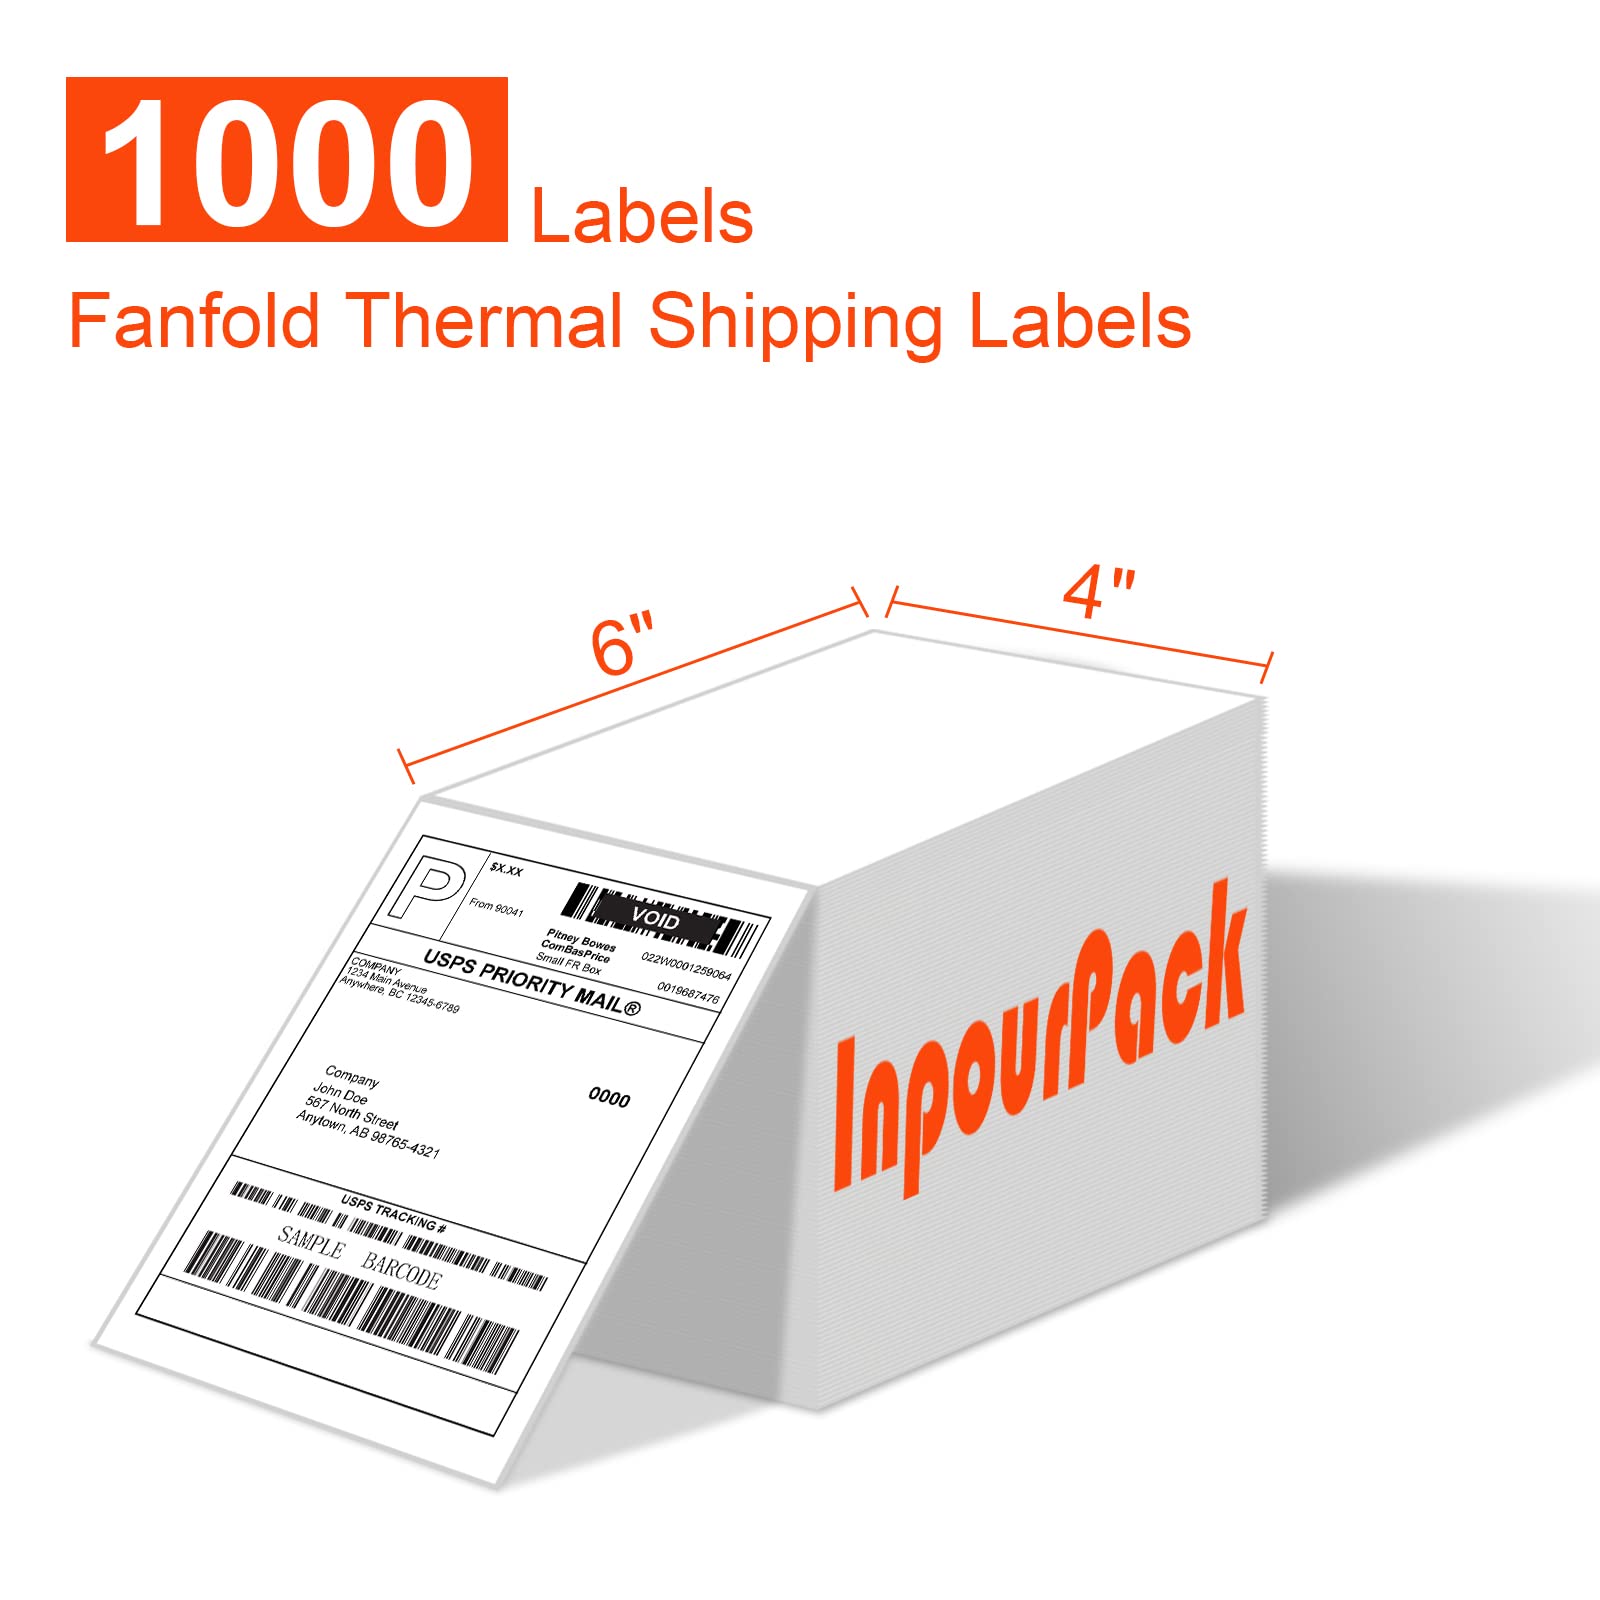 InpourPack 4" x 6" Fanfold Labels Direct Thermal Labels, Shipping Package Labels with Perforated line for Thermal Printers (1000 Labels/Stack, 1 Stack)